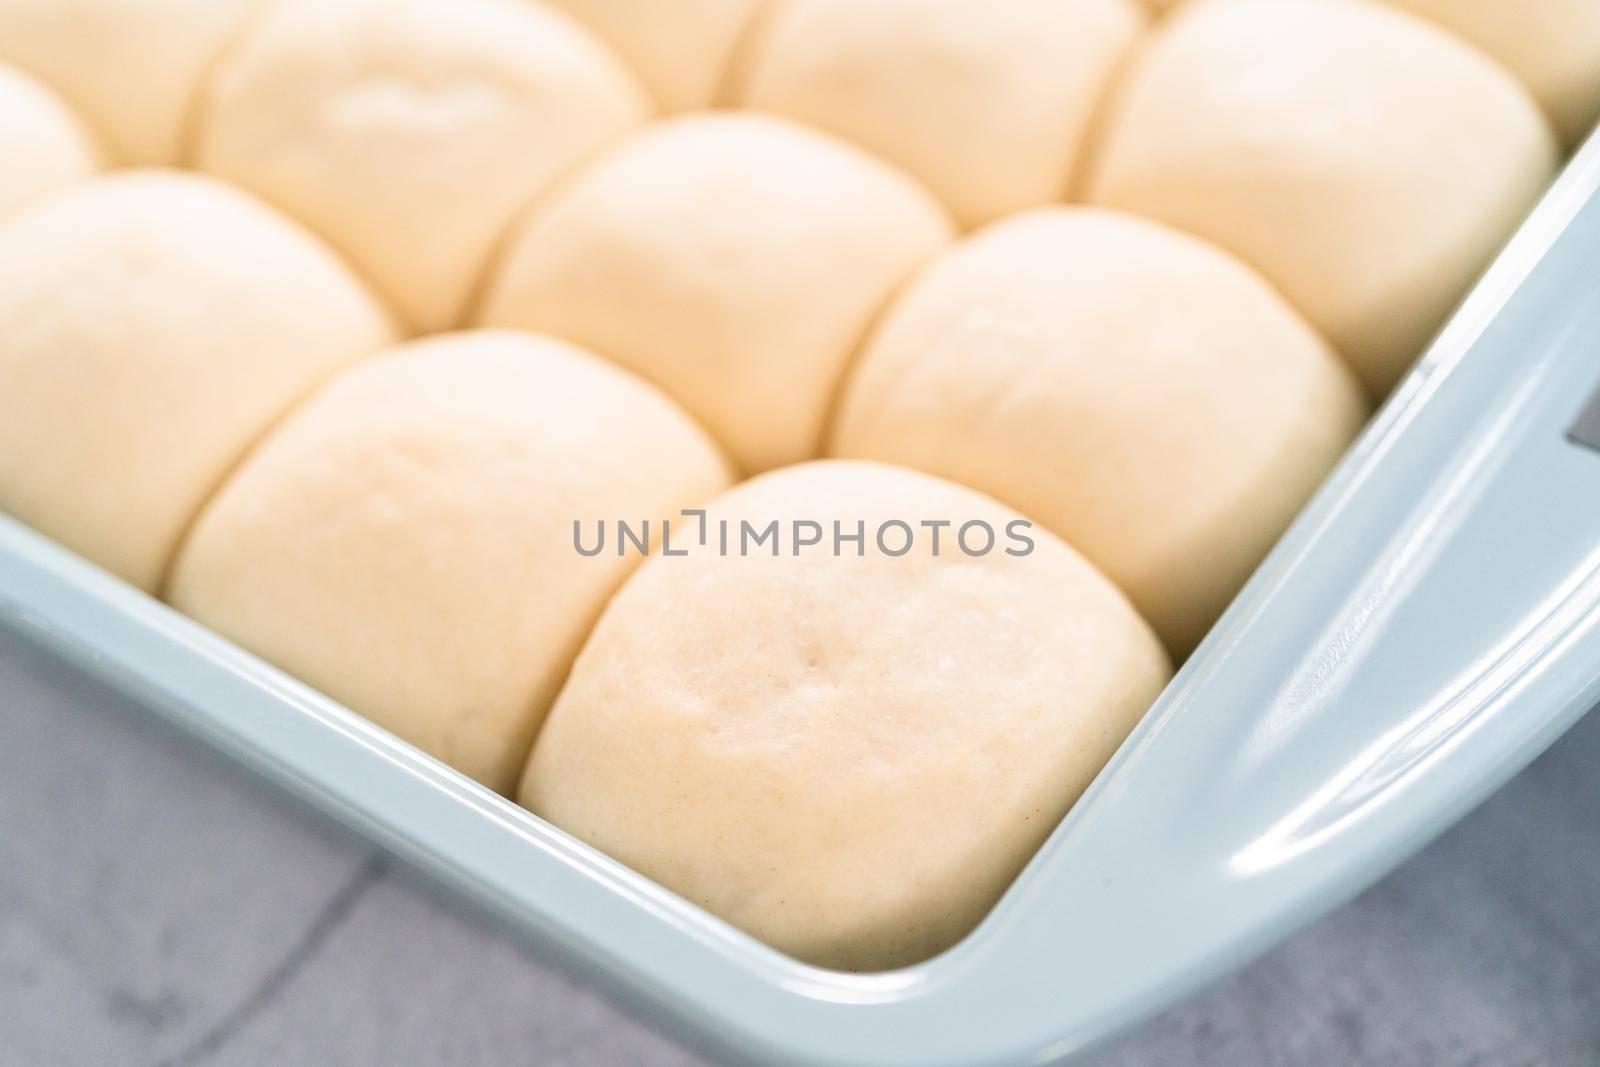 Rizing dinner rolls in an the baking pan.